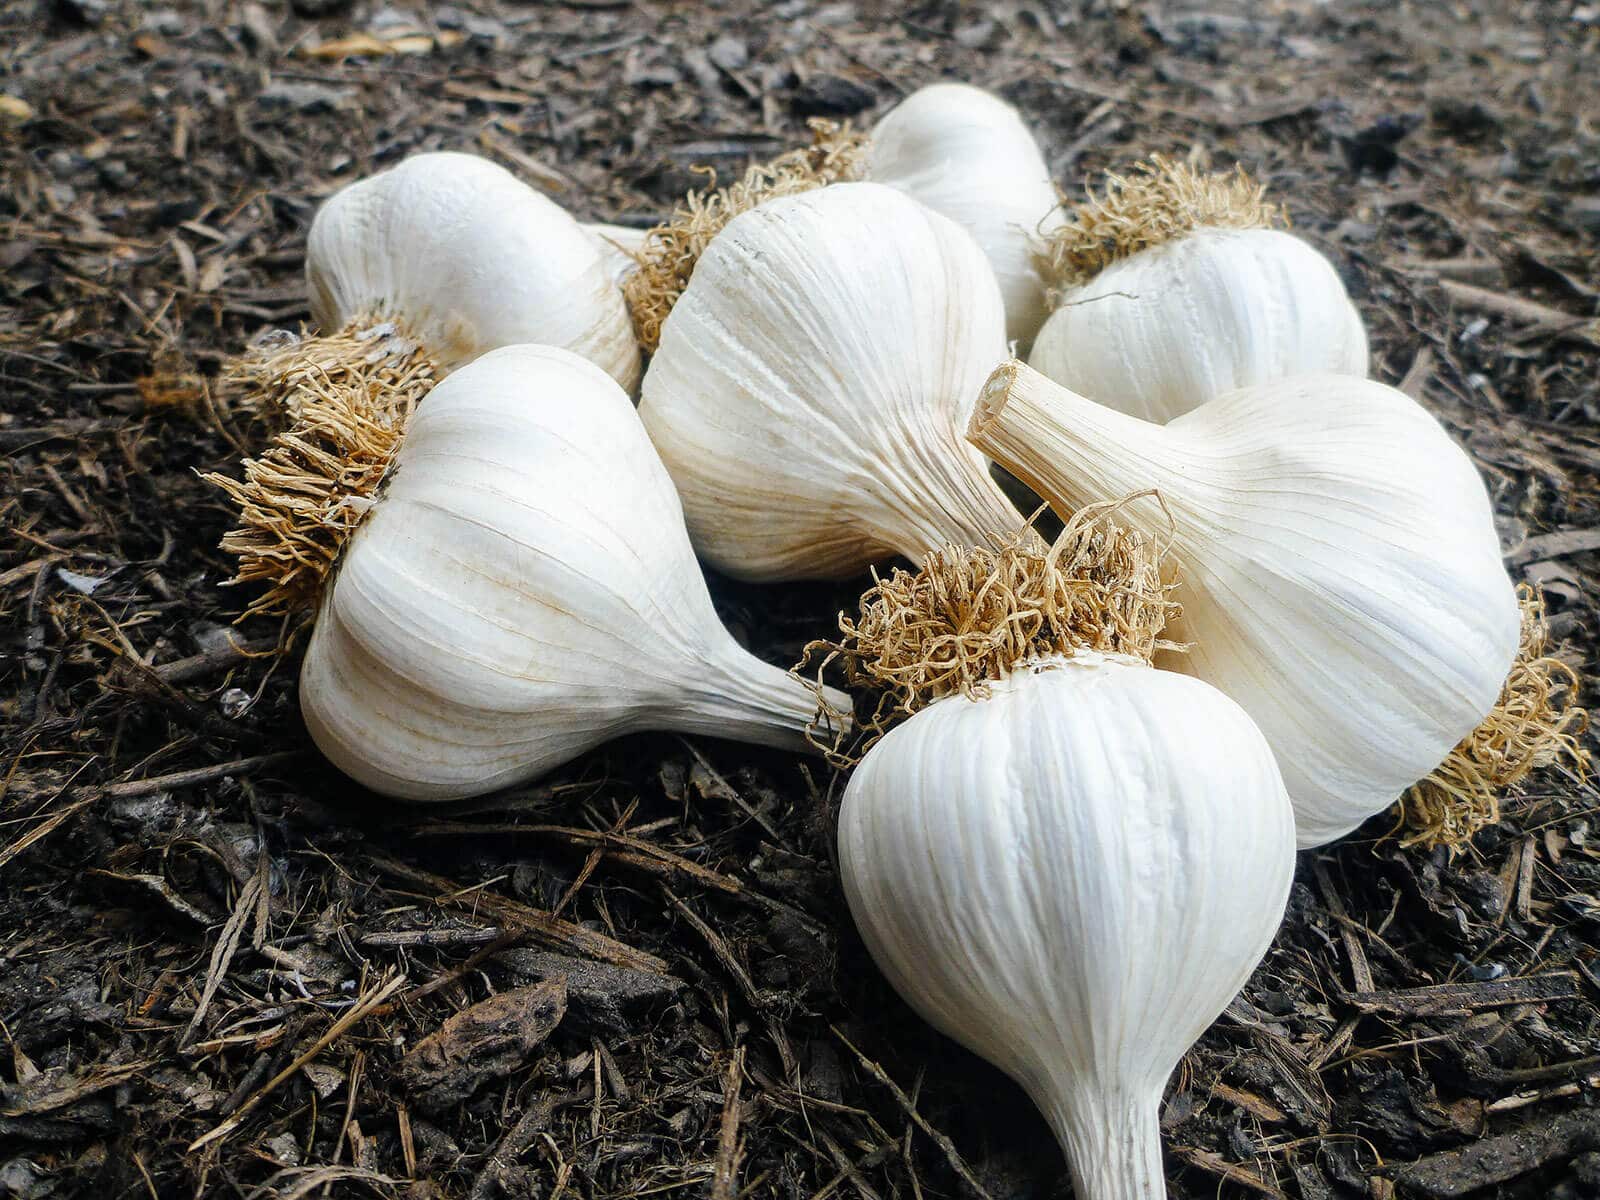 Freshly harvested garlic bulbs in summer with the roots and tops trimmed